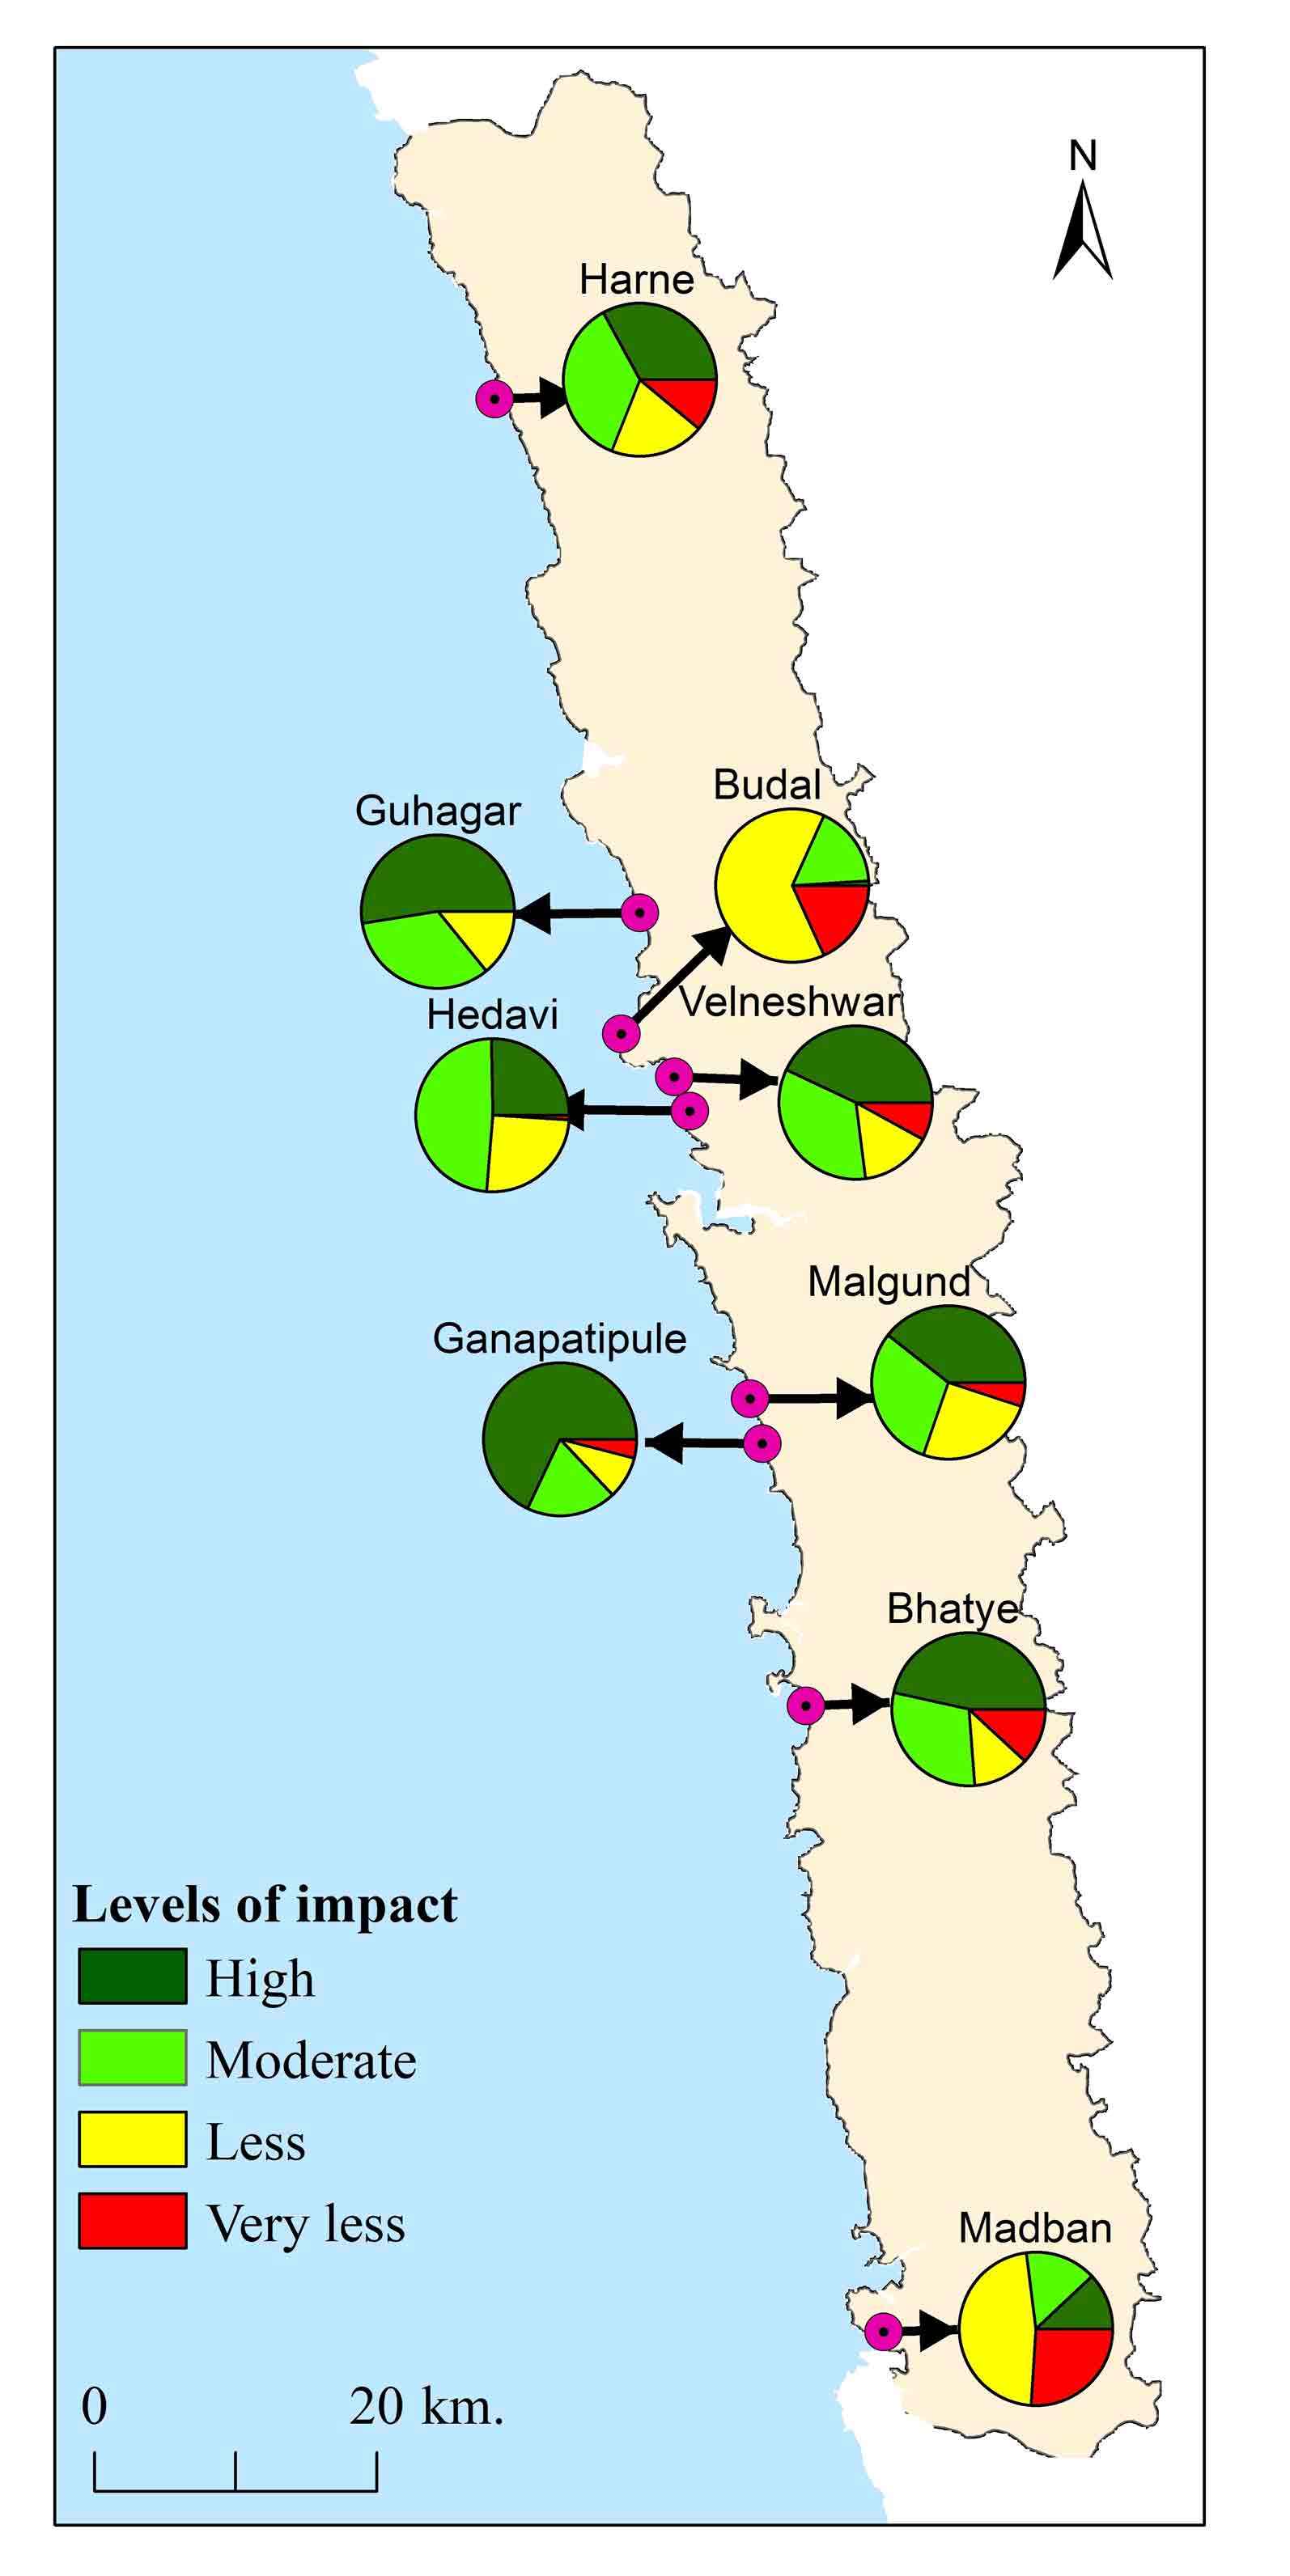 Use of AHP based Weighted Analysis for Impact Assessment of Coastal Tourism in Ratnagiri District, Maharashtra (India): Respondents’ Point of View